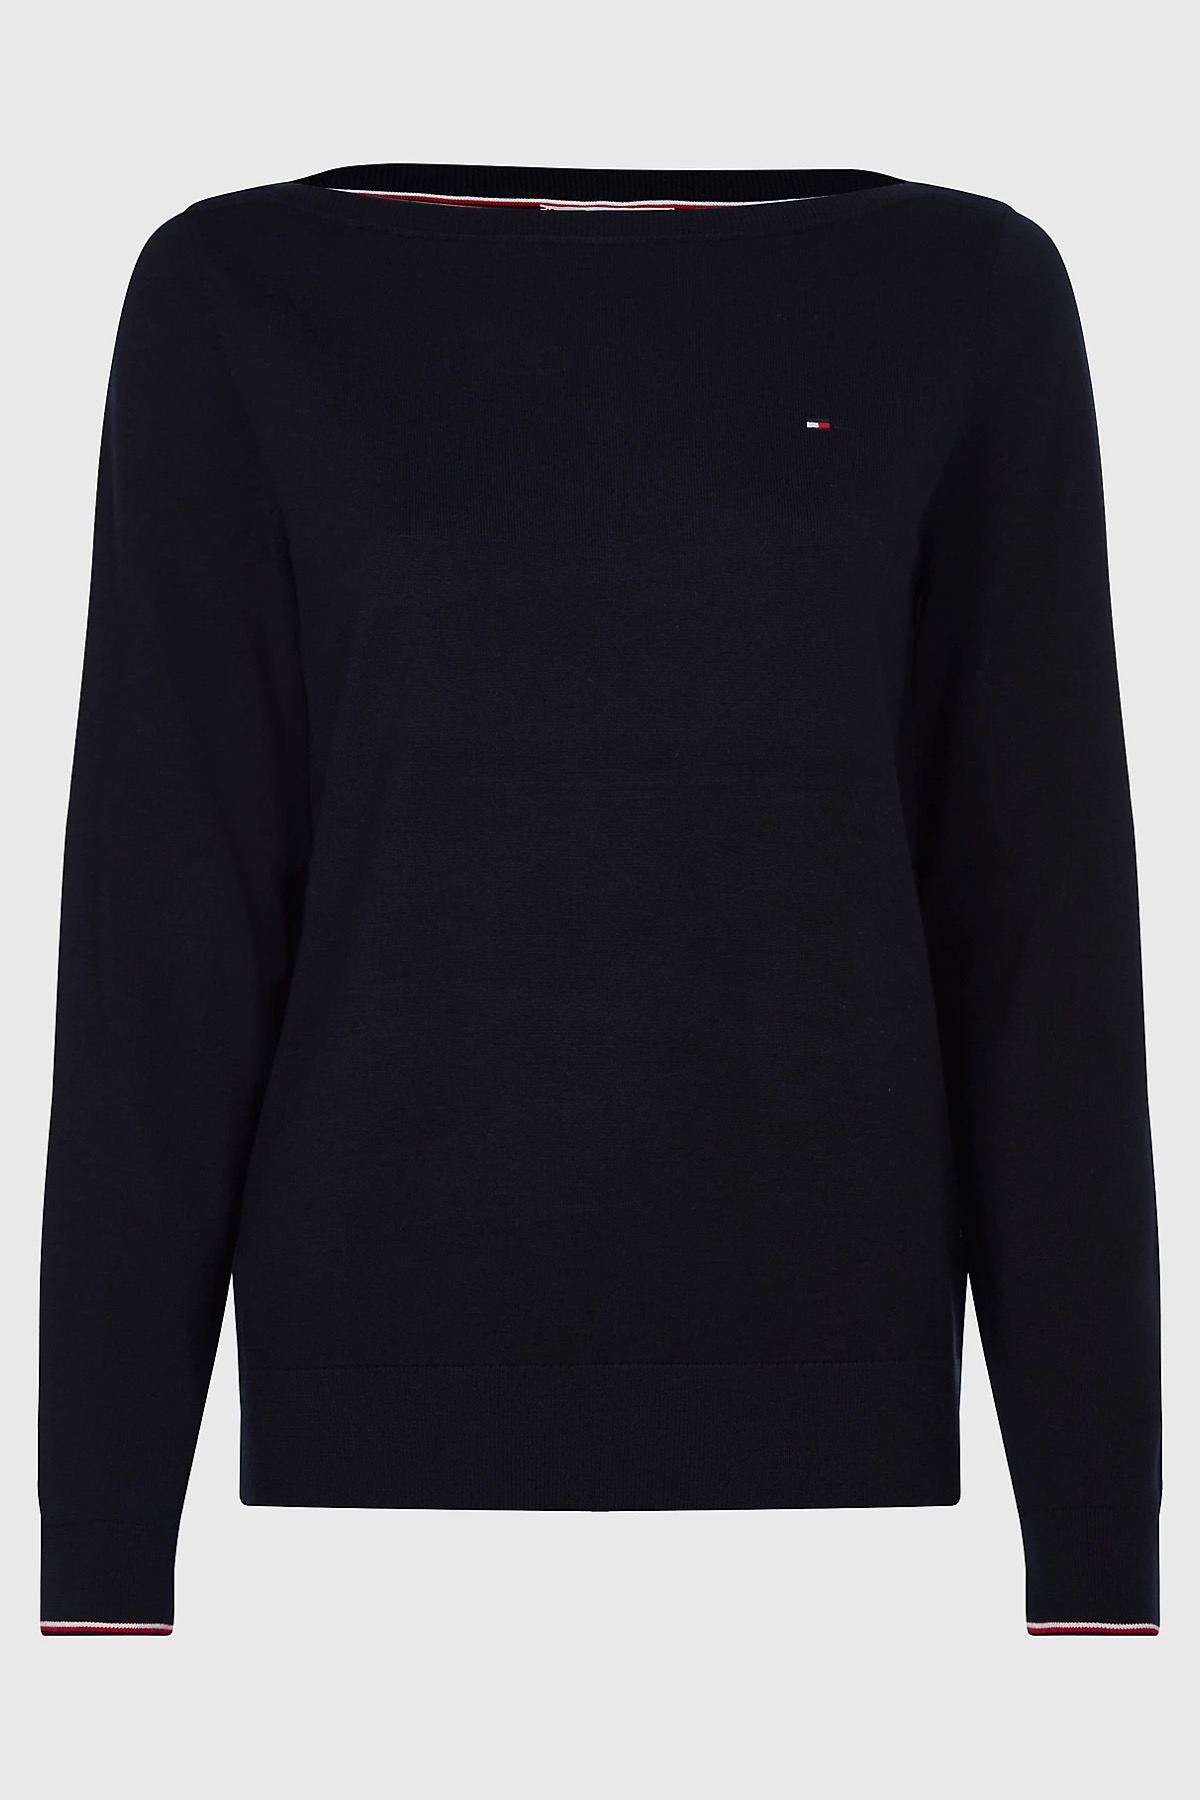 TOMMY HILFIGER PULLOVER IN COTONE BLU 25656